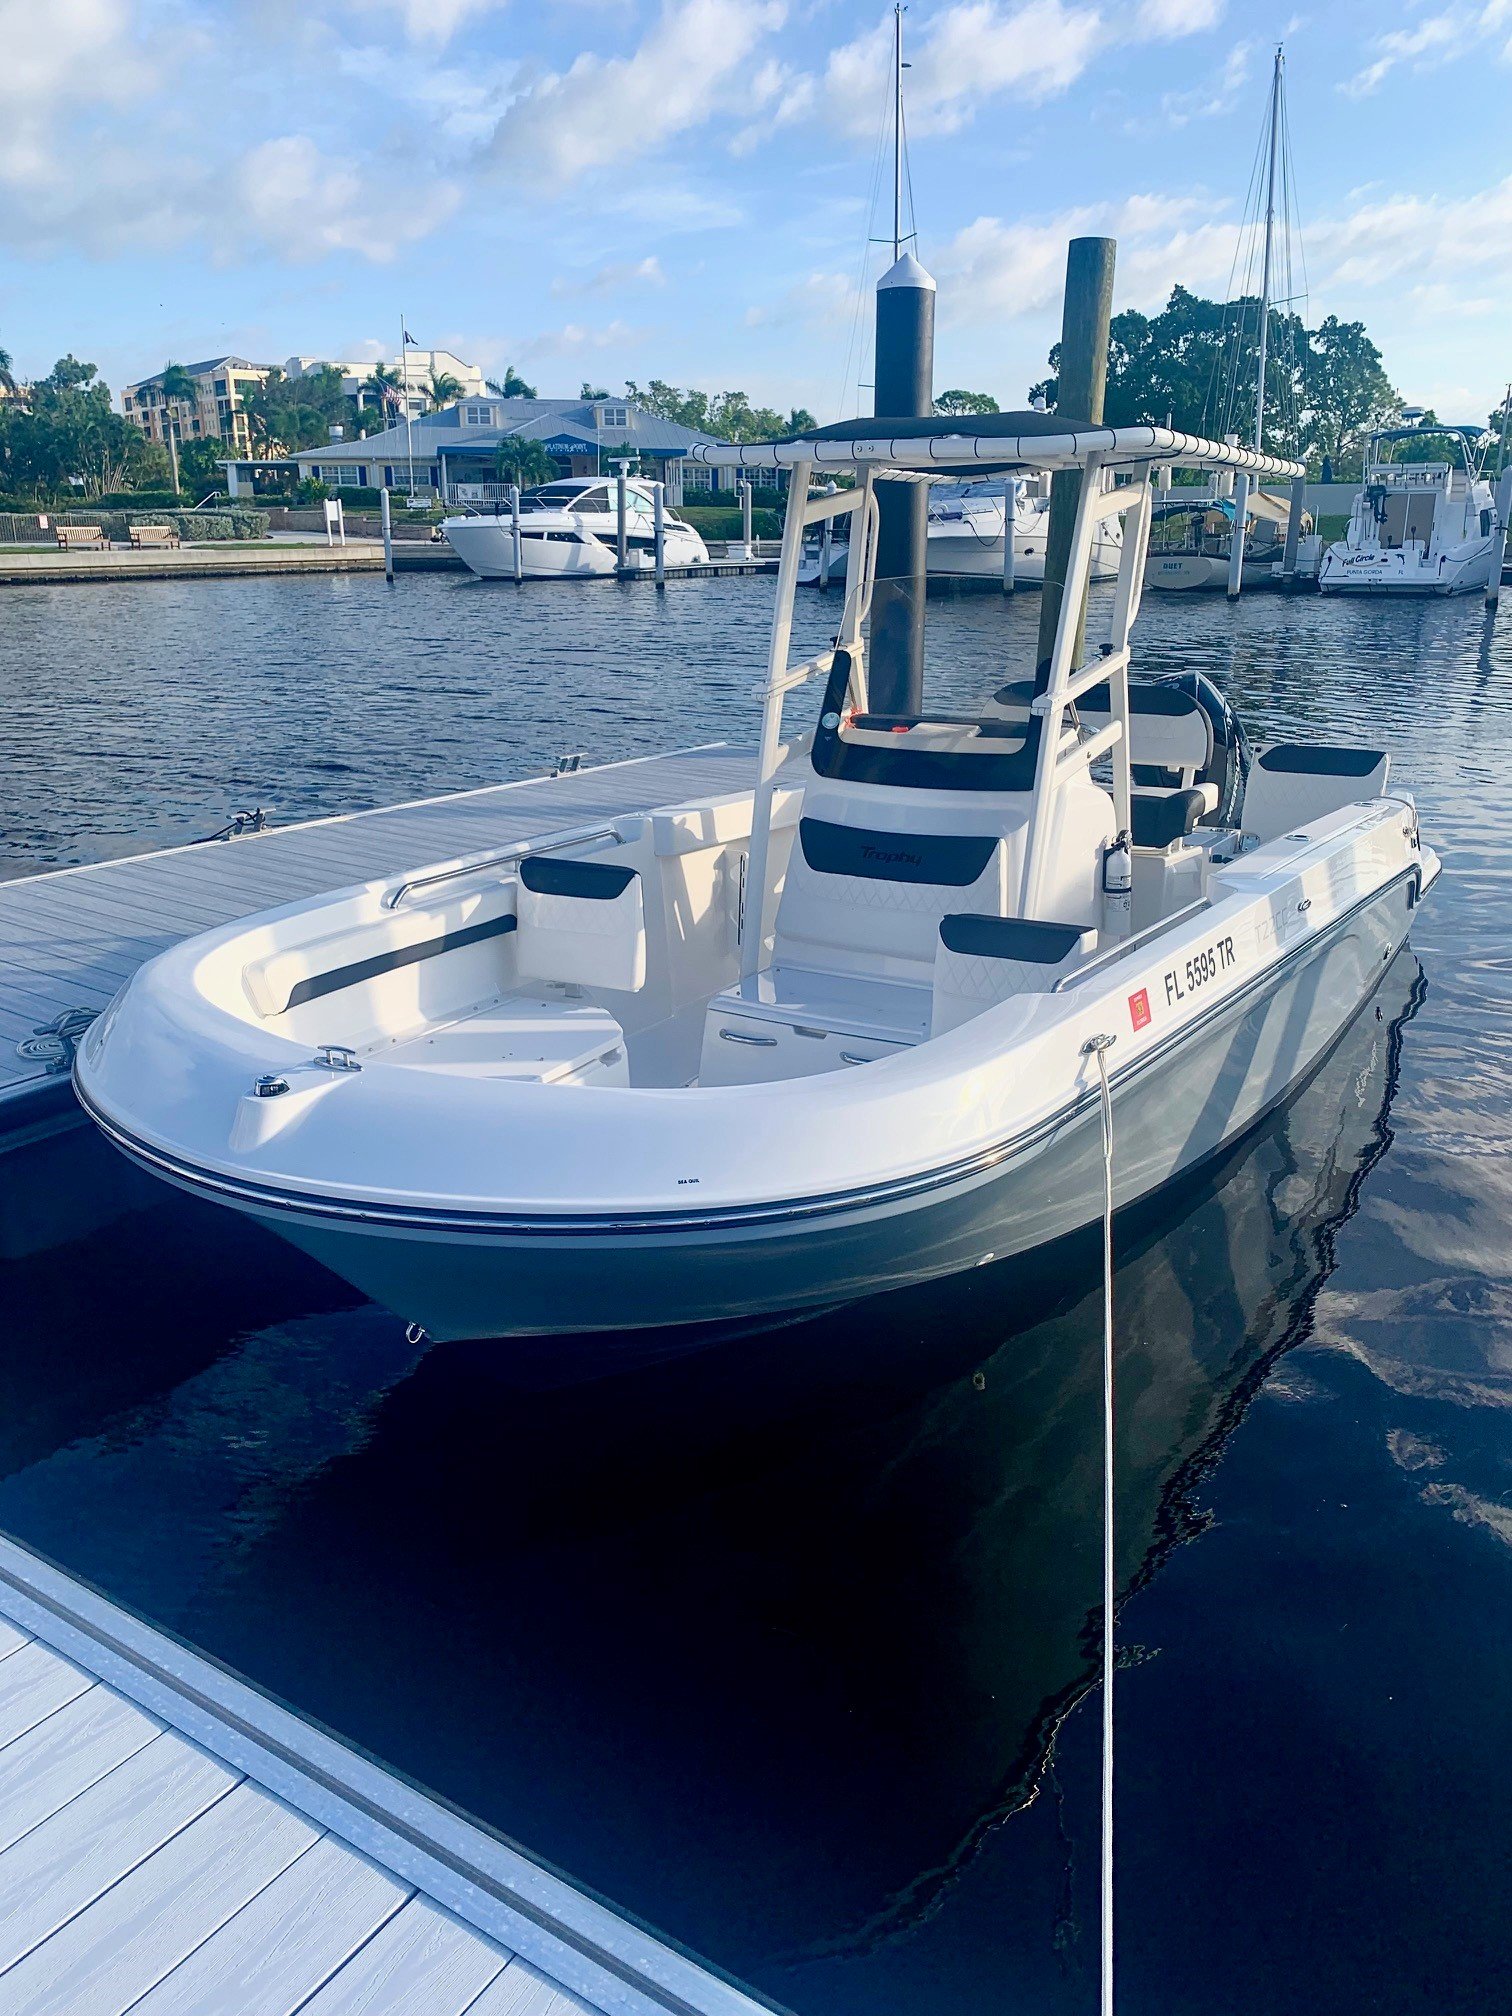 SEA QUILL (22FT Bayliner Trophy Center Console - 150 HP~Fishing)